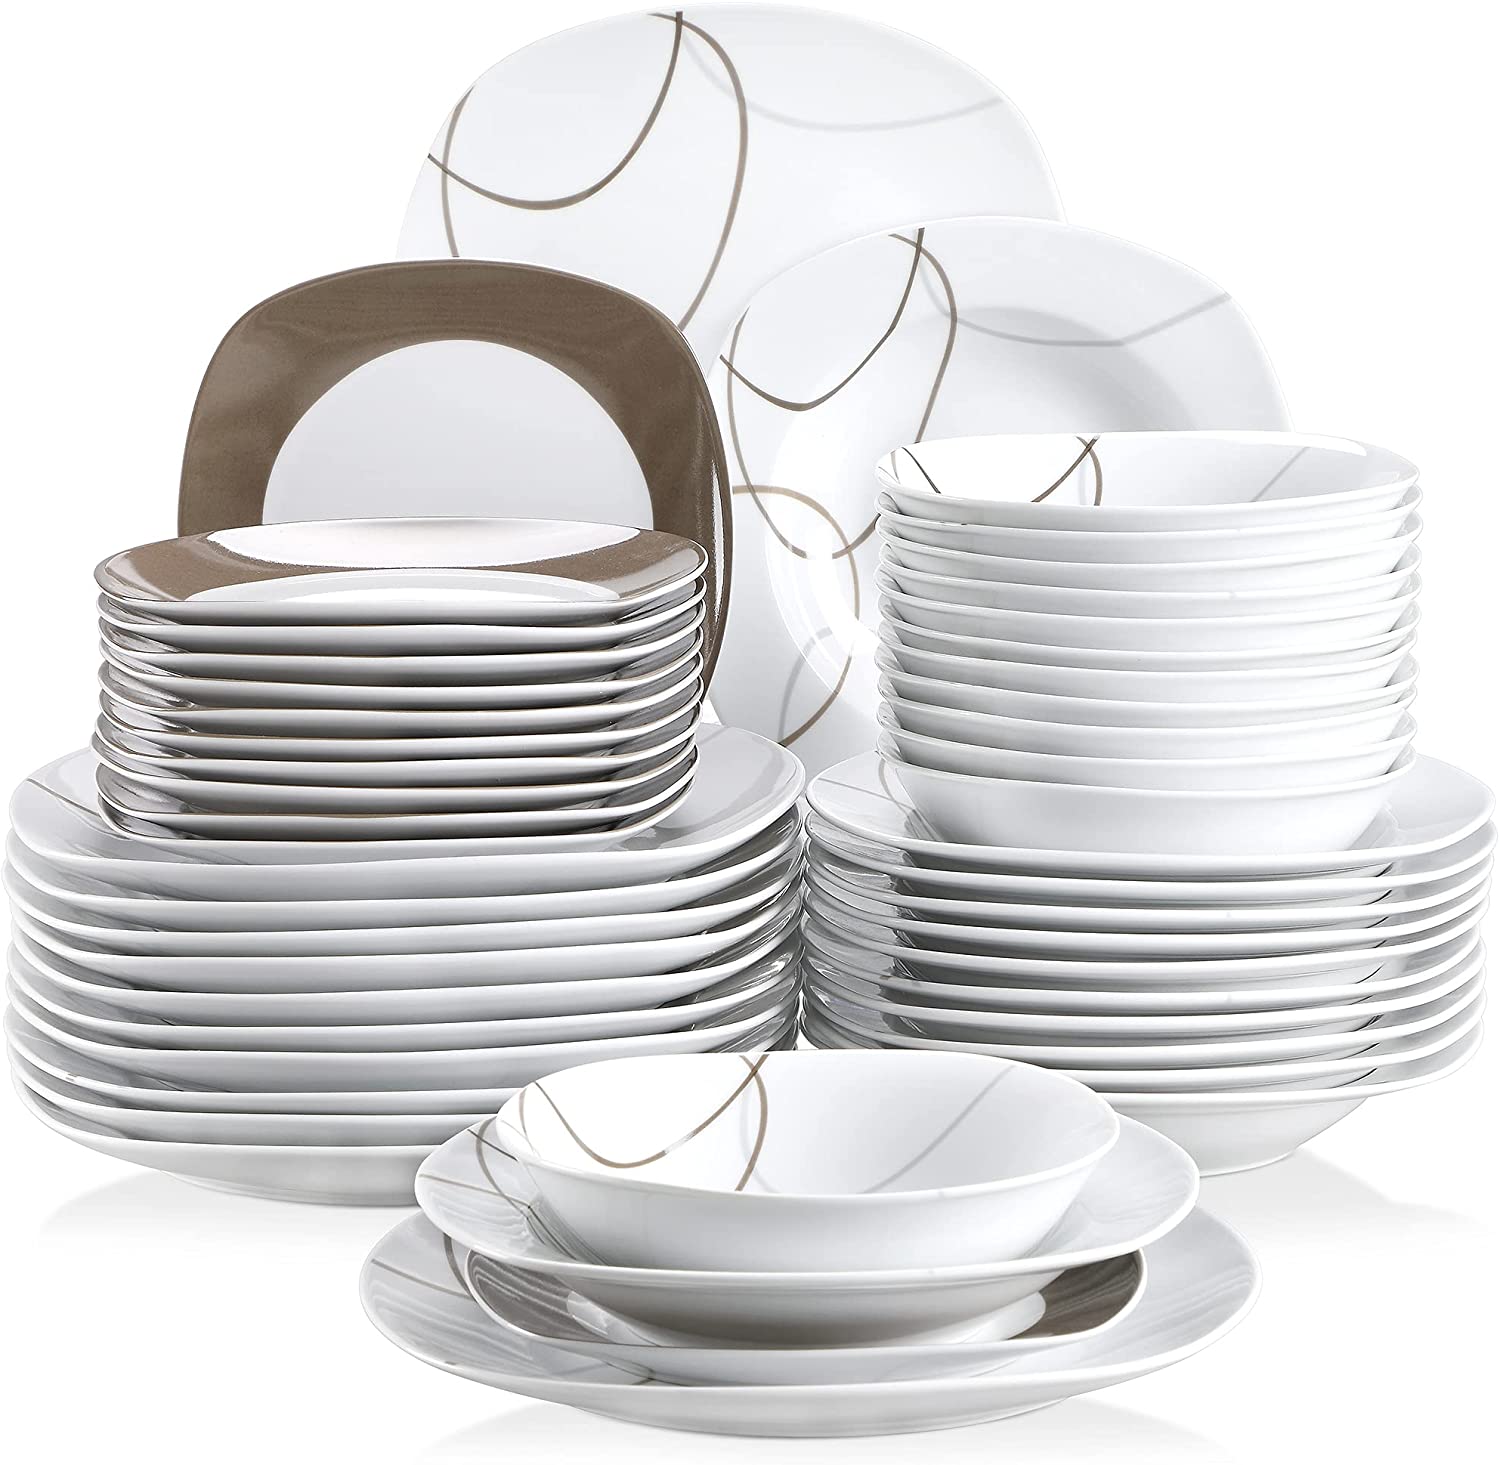 Veweet Aviva Porcelain Dinner Service 30 Pieces / 60 Pieces and Multiple additional products that can be combined with the Aviva Dinner Service